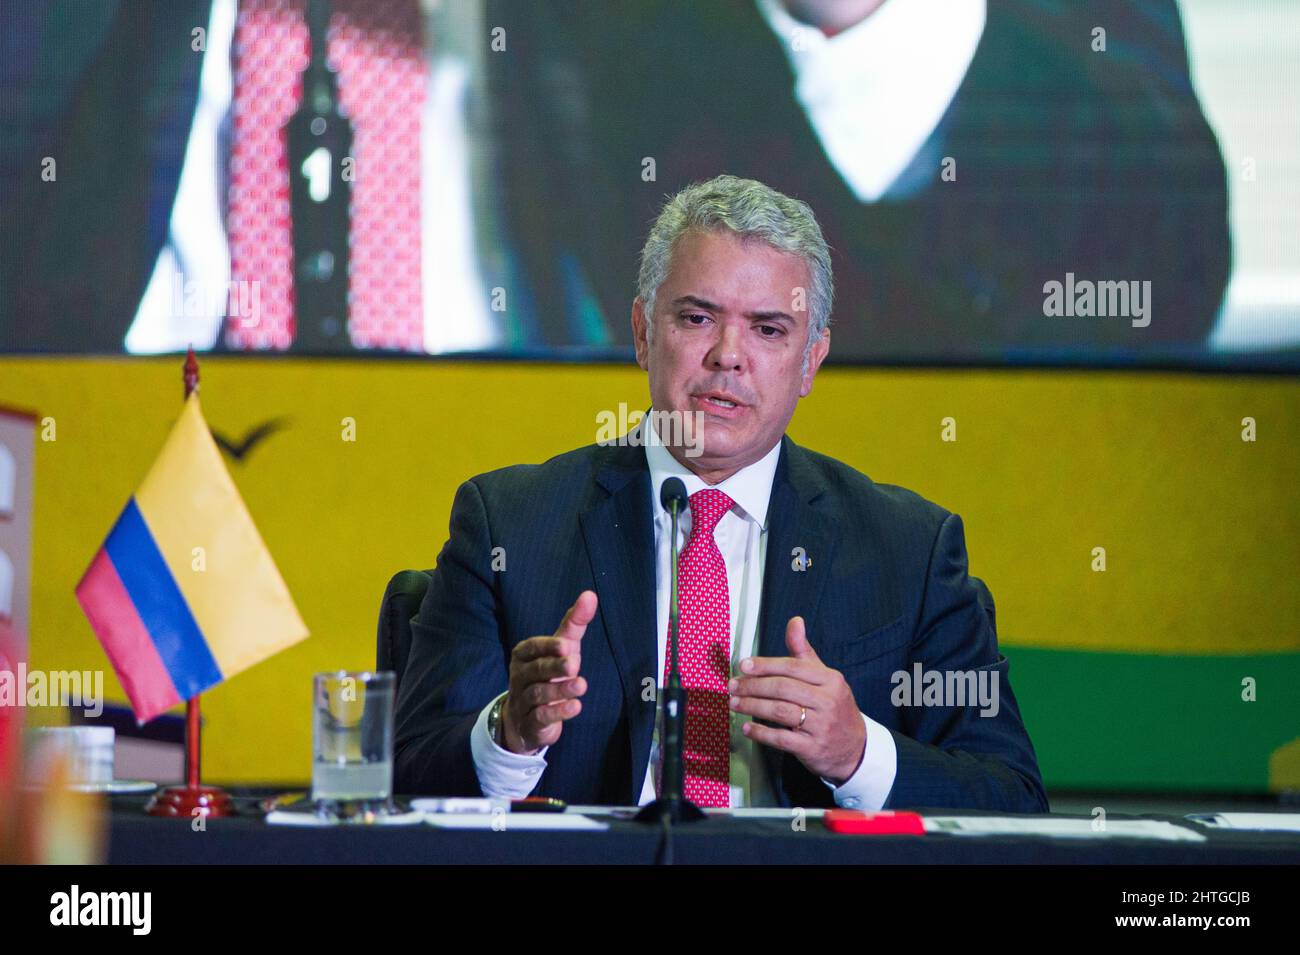 Colombia's president Ivan Duque Marquez gives a speech during the inauguration ceremony of the Week of Citizen Security 'Semana de Seguridad Ciudadana' 2022, in Bogota, Colombia where 26 countries take part from February 28 to March 3. On February 28, 2022. Stock Photo